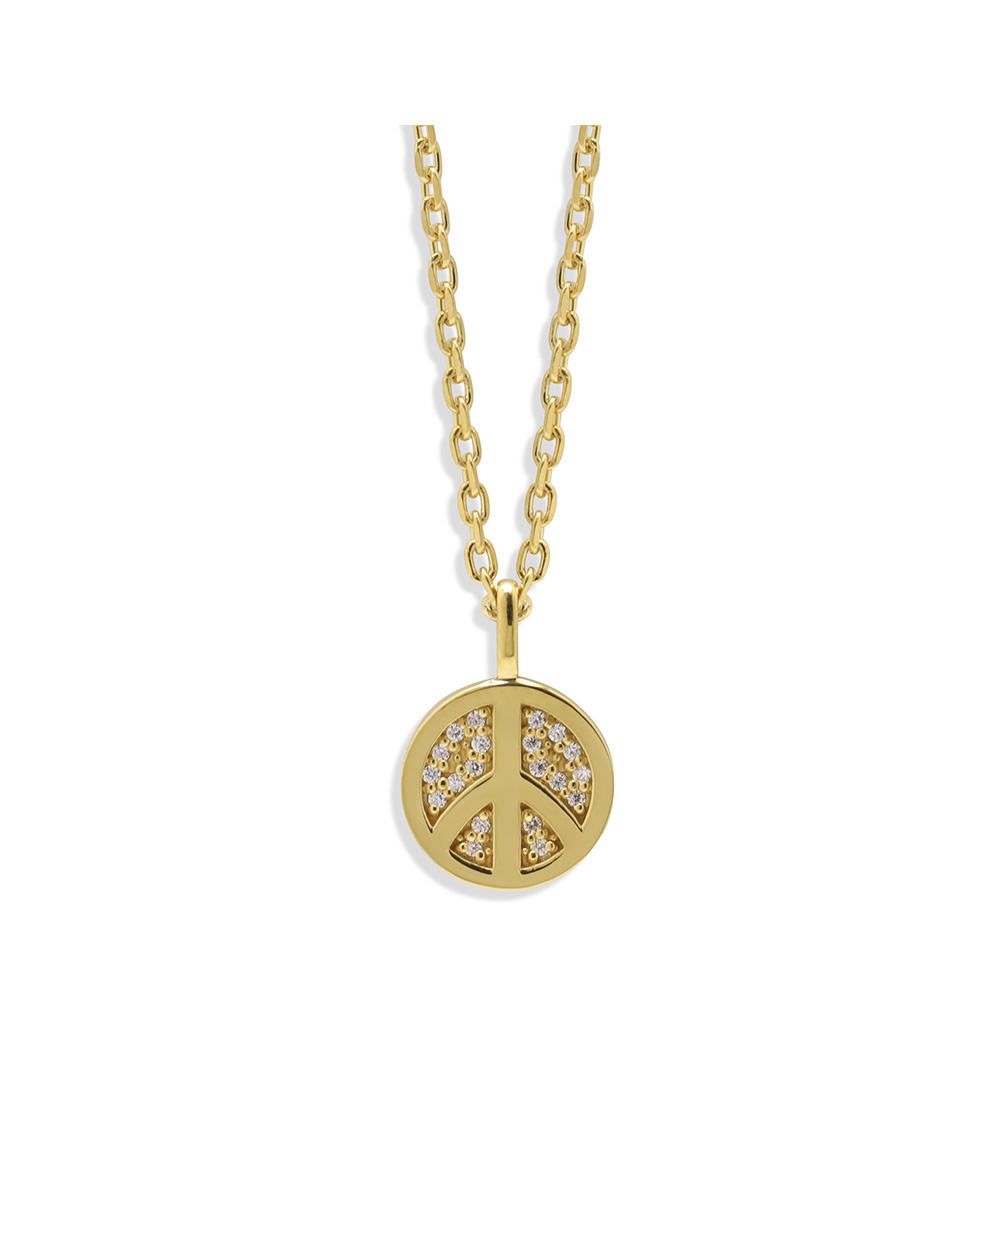 PEACE NECKLACE GOLD 詳細画像 Gold 5